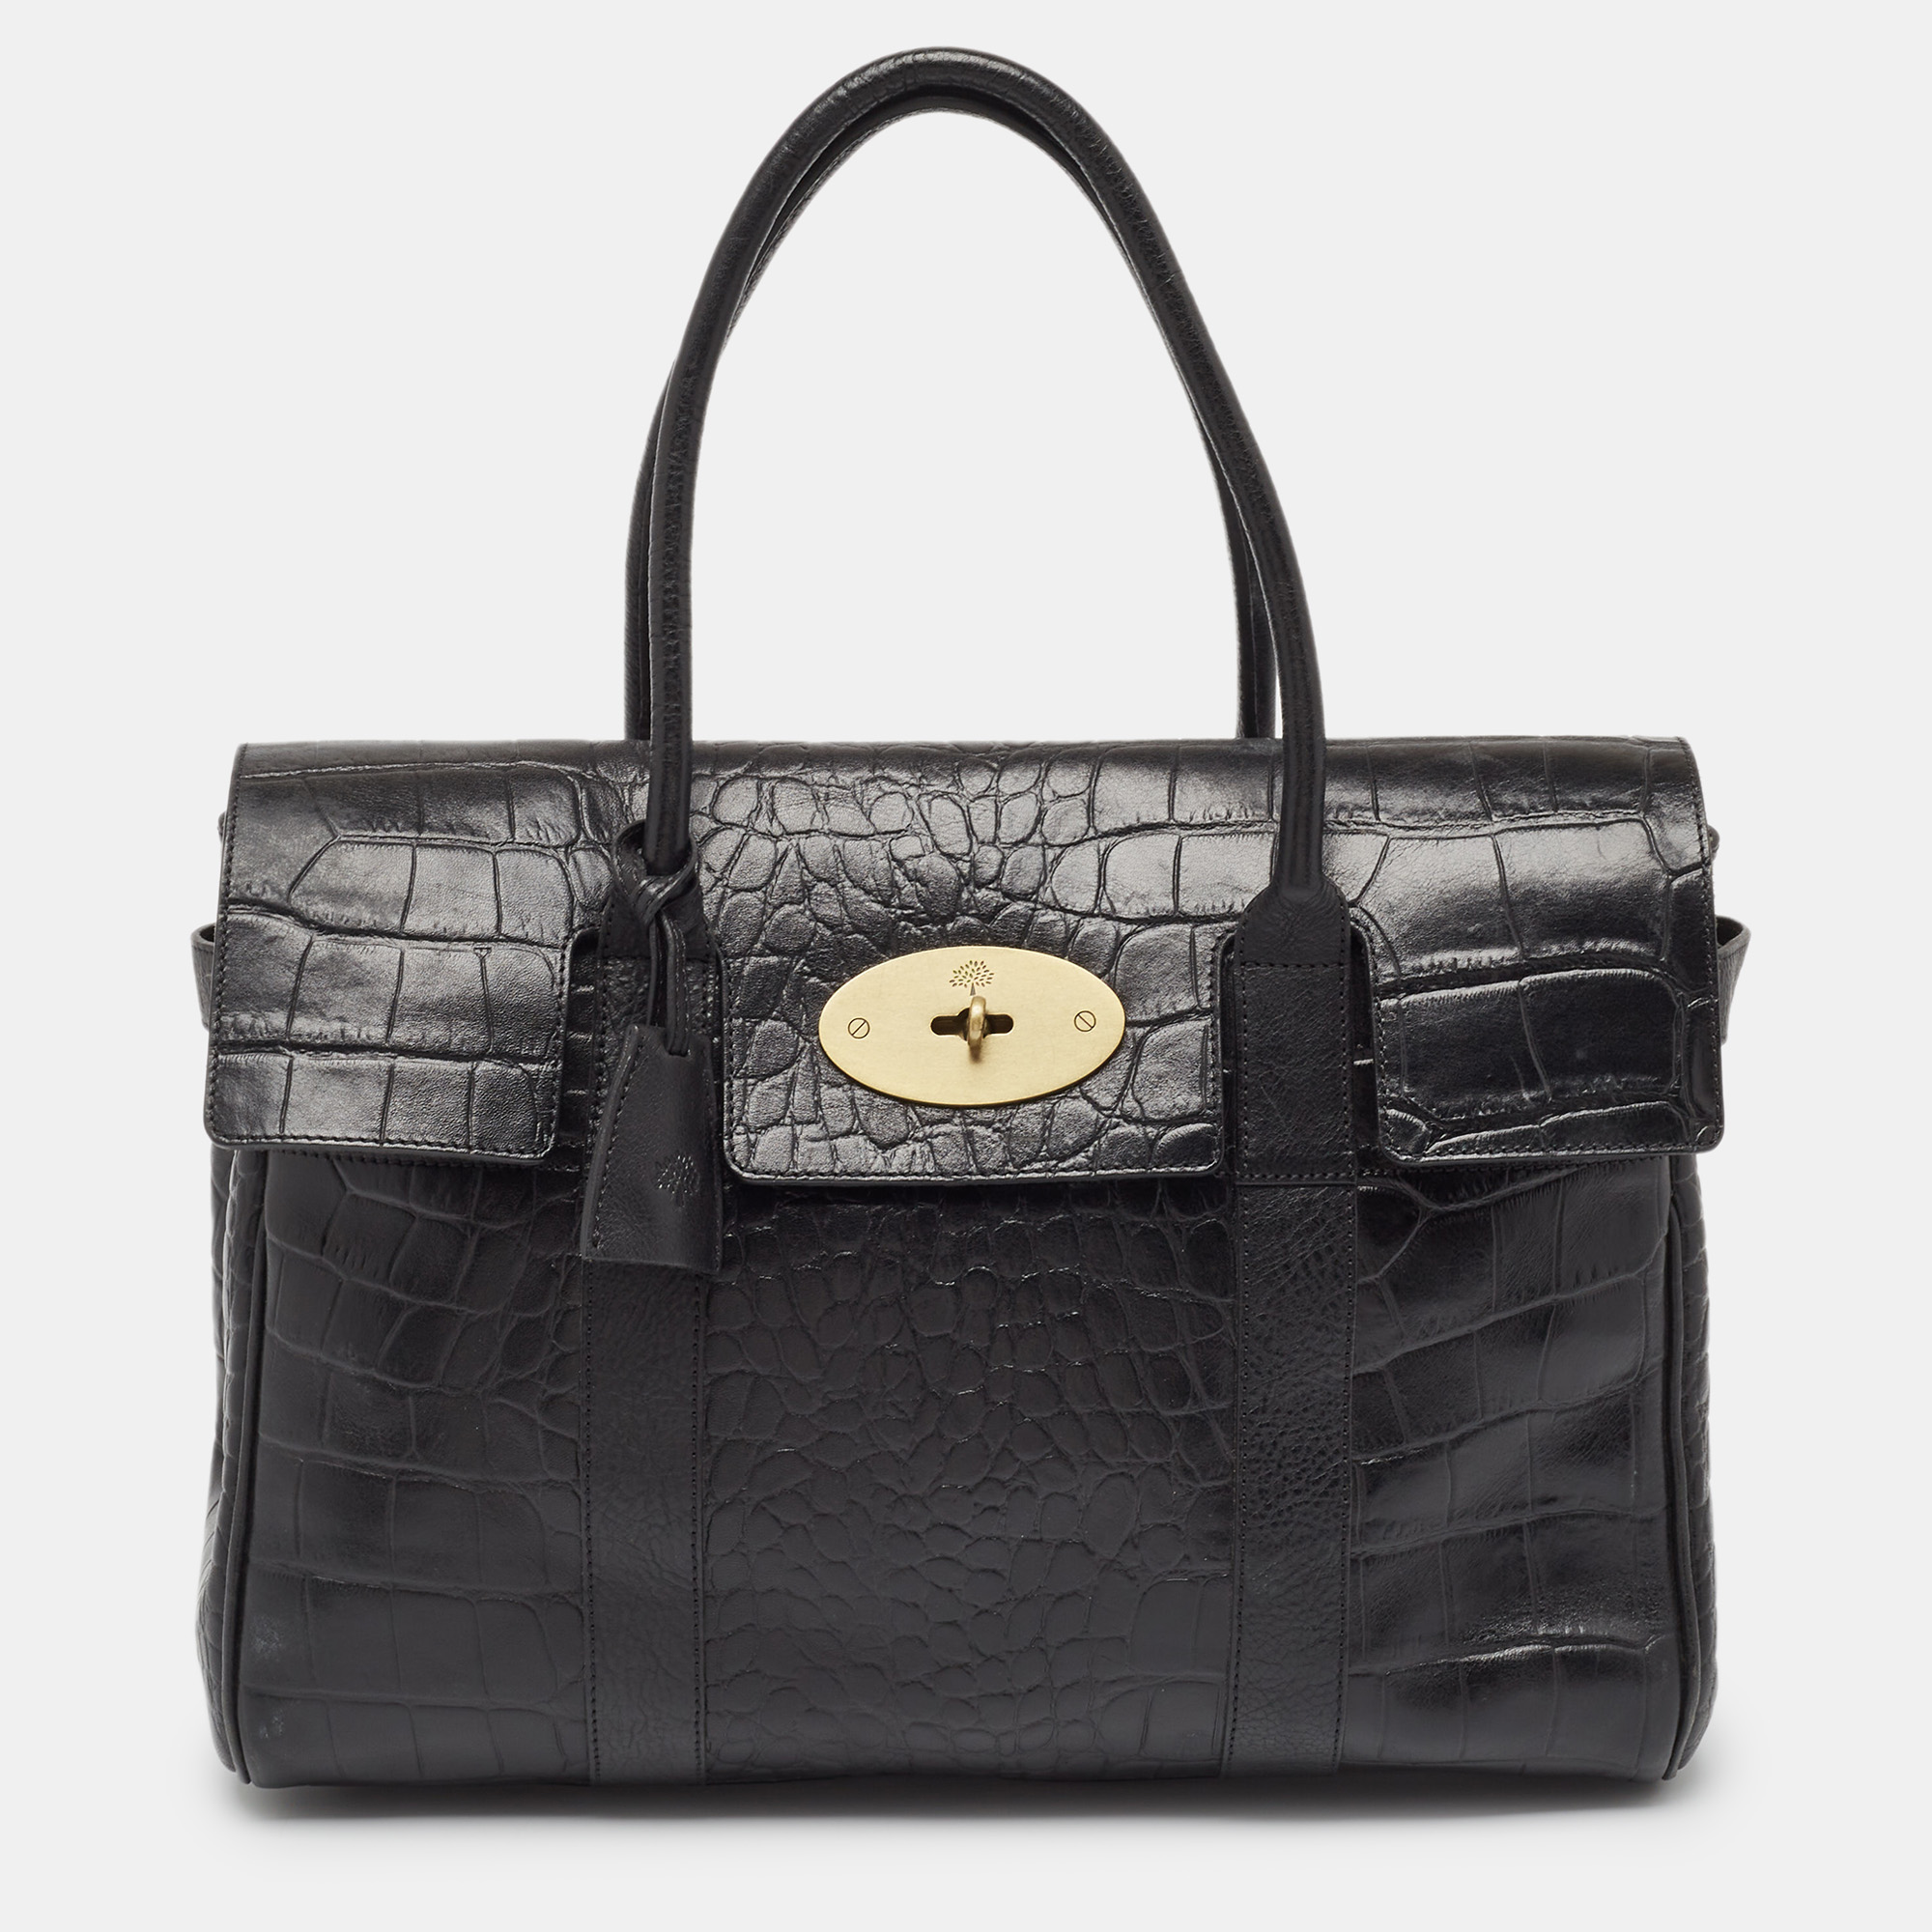 Pre-owned Mulberry Black Croc Embossed Leather Bayswater Satchel